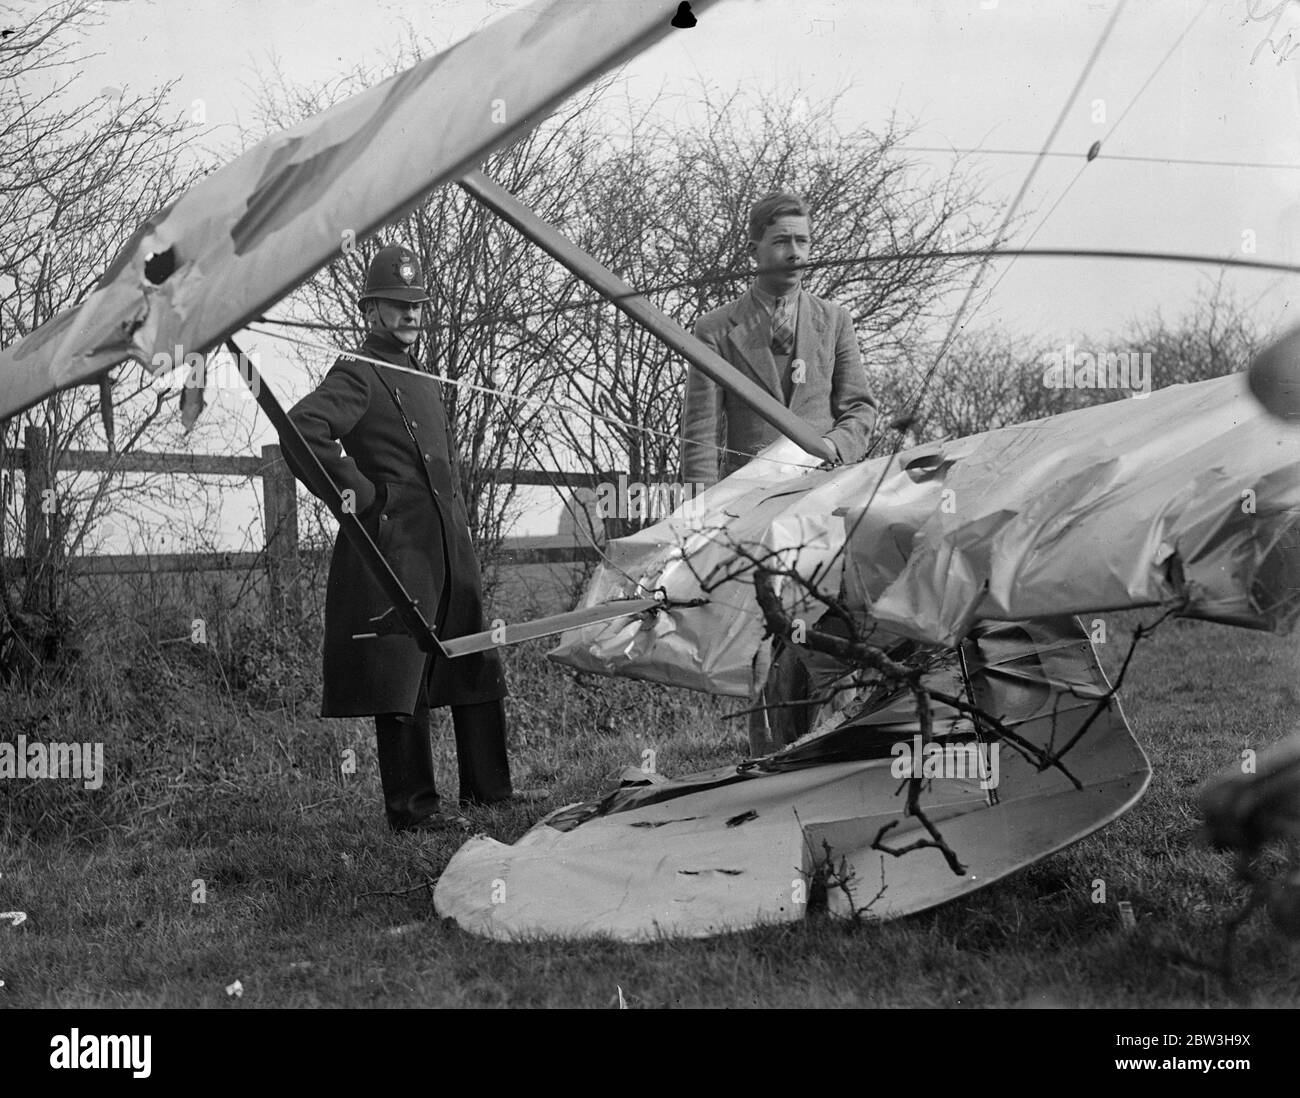 Plane , piloted by 22 year old Londoner hits tree and crashes into field in Essex . The pilot , Mr John Everett Ray , looking into the cockpit of his damaged plane . 19 March 1935 Stock Photo